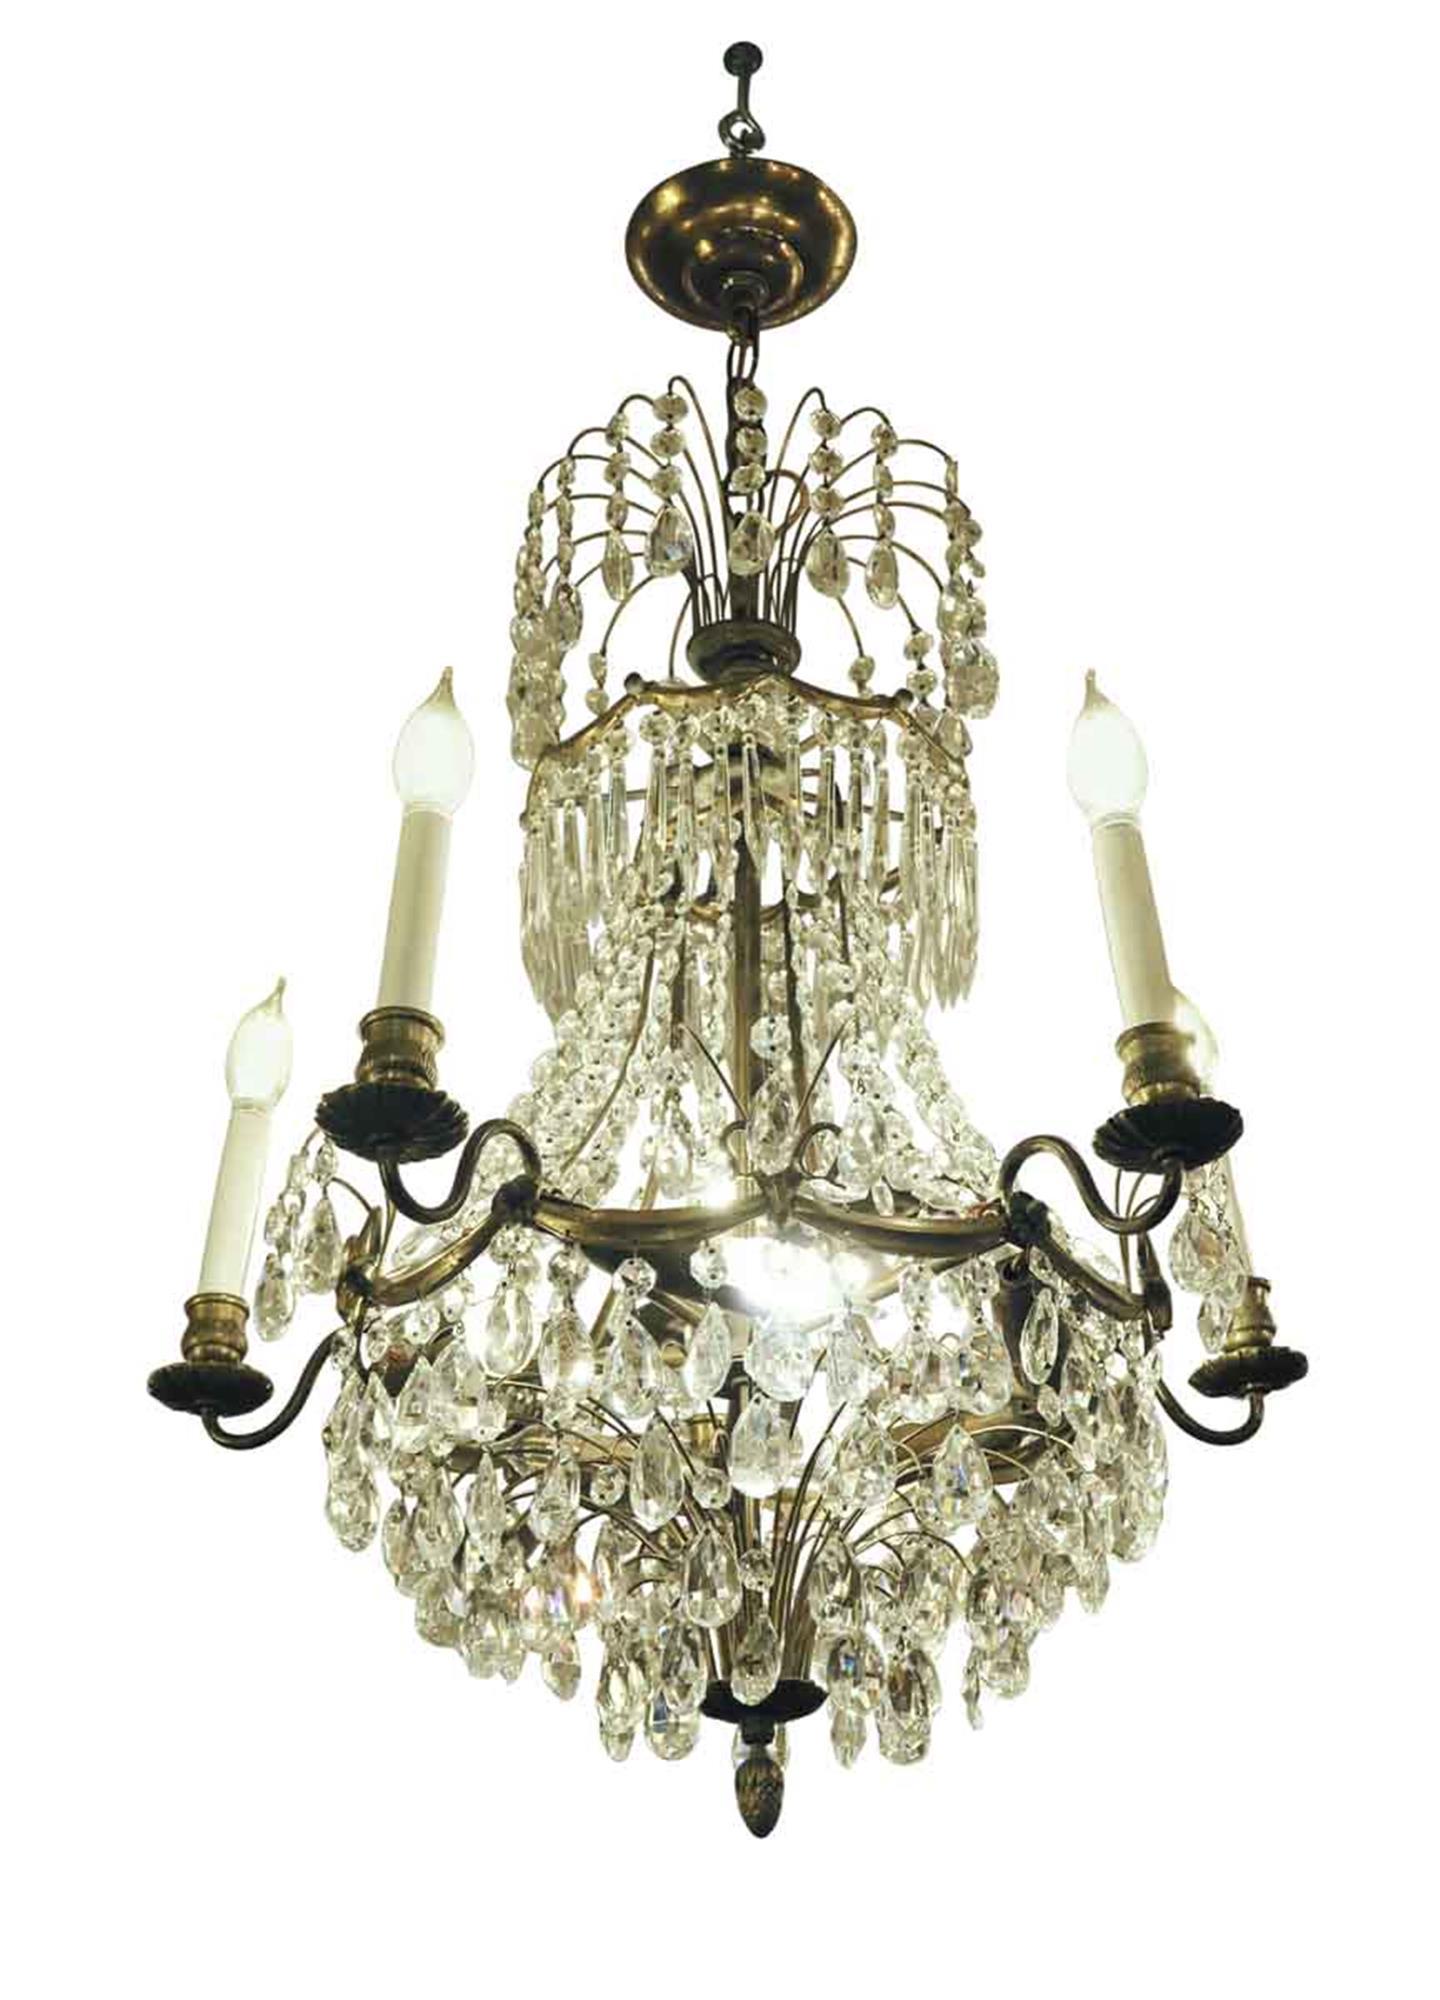 1920s Empire style crystal basket chandelier with a five arm brass frame and five lights inside the ring, pointing sideways. There are 10 lights total. This can be seen at our 2420 Broadway location on the upper west side in Manhattan.